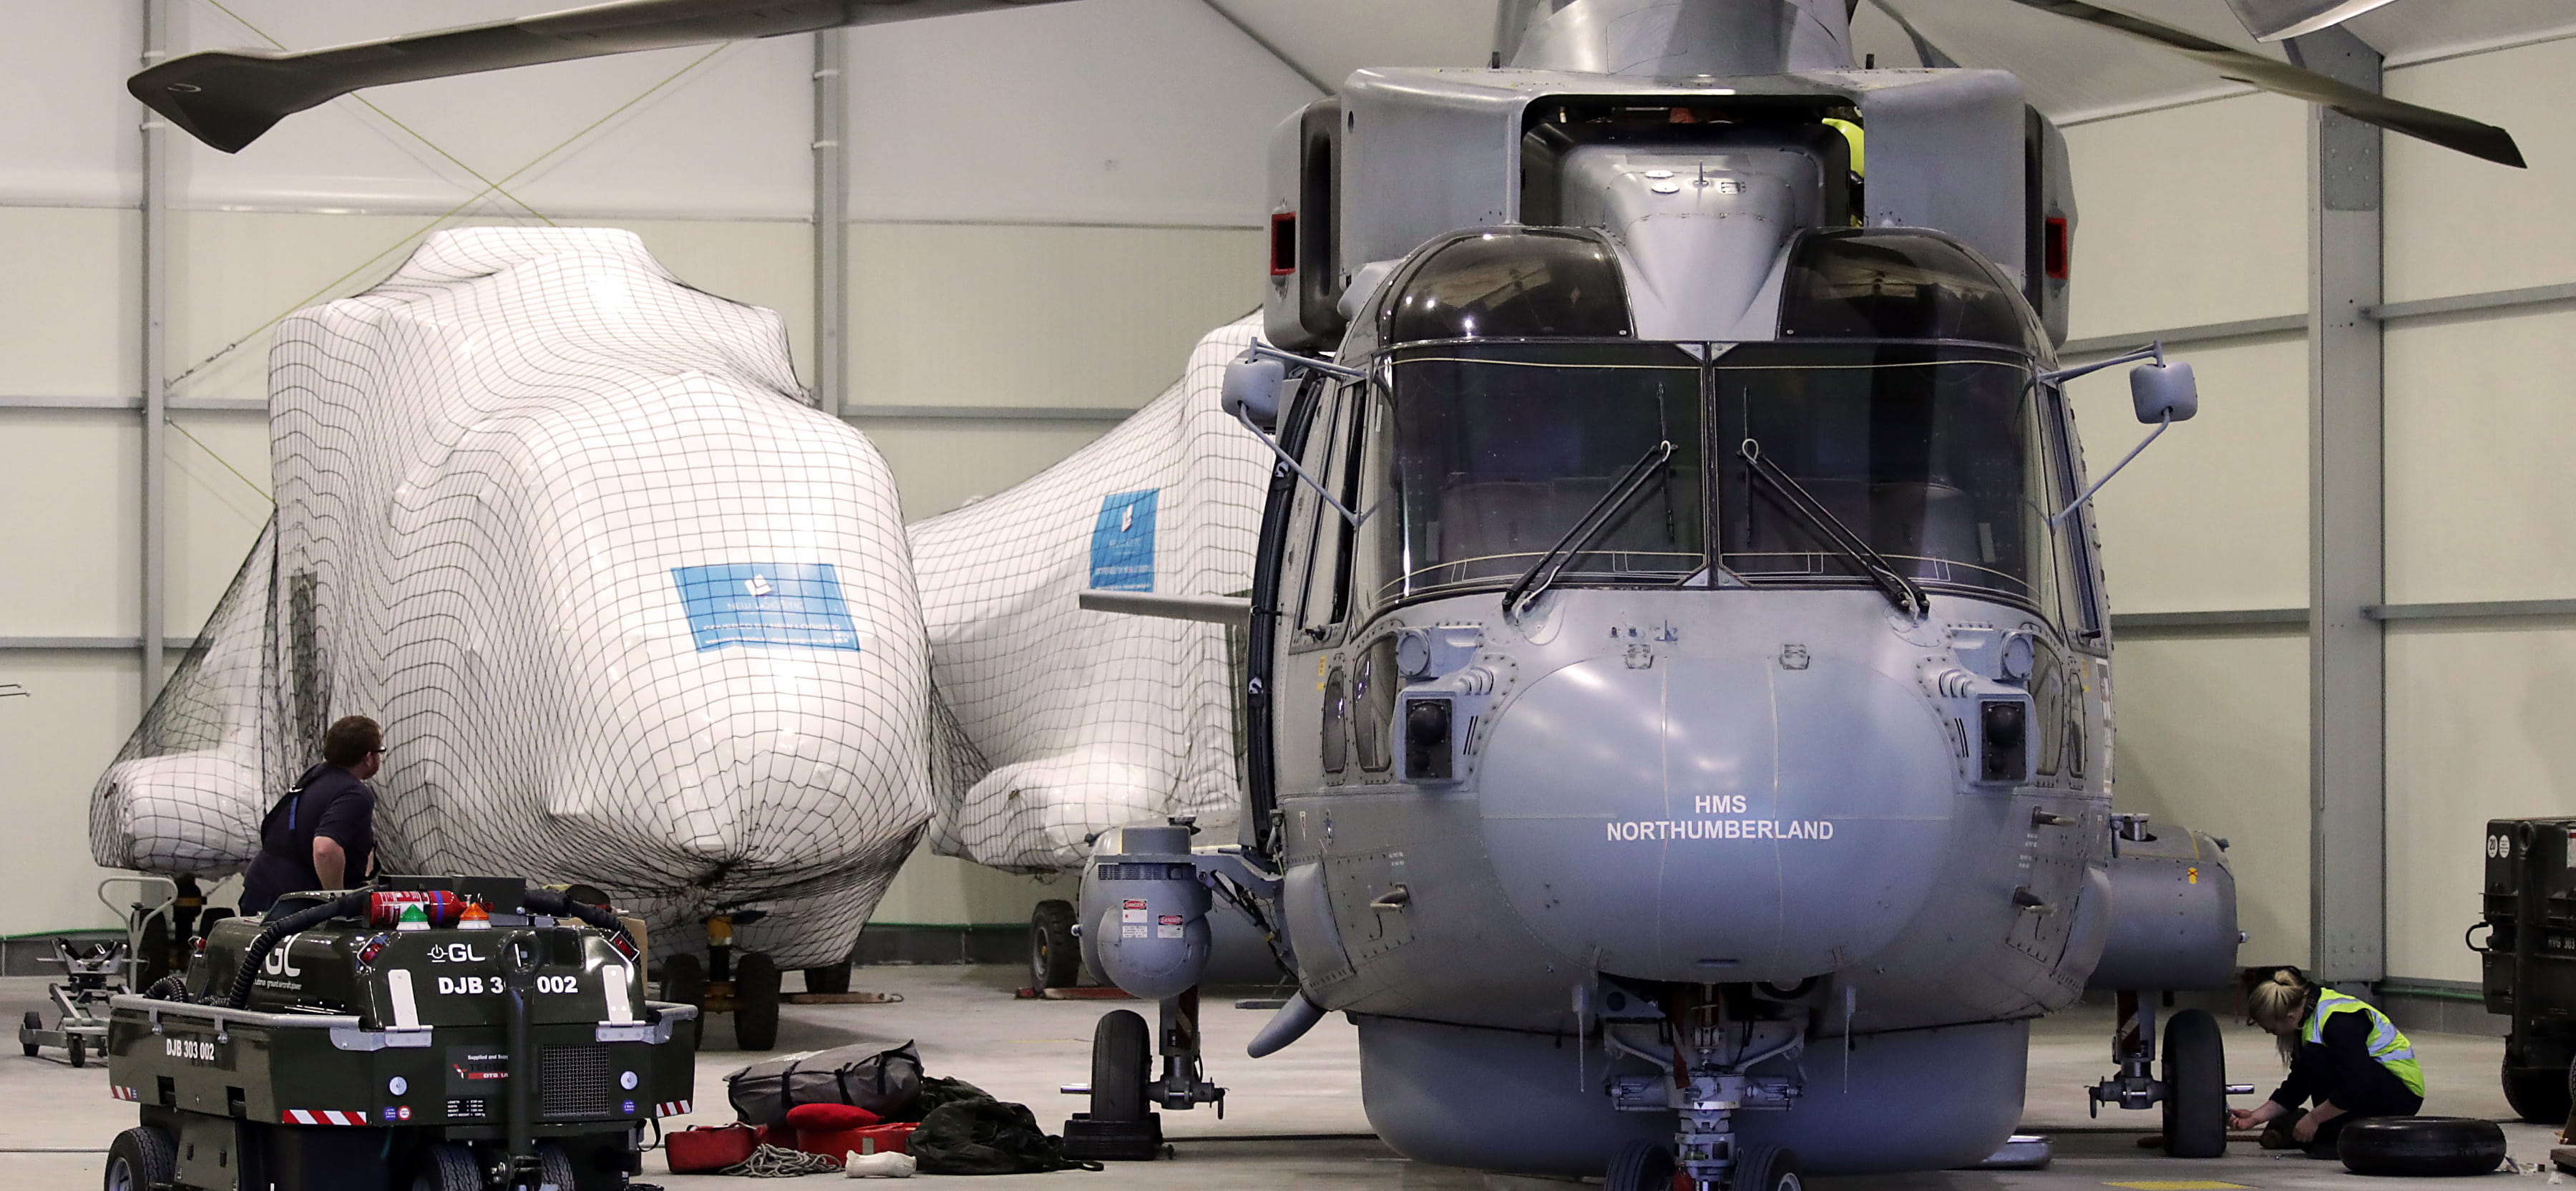 AIR ENGINEER TECHNICIANS WORKING INSIDE A HANGER IN CATANIA ON A MERLIN READY FOR FLYING IN THE MORNING